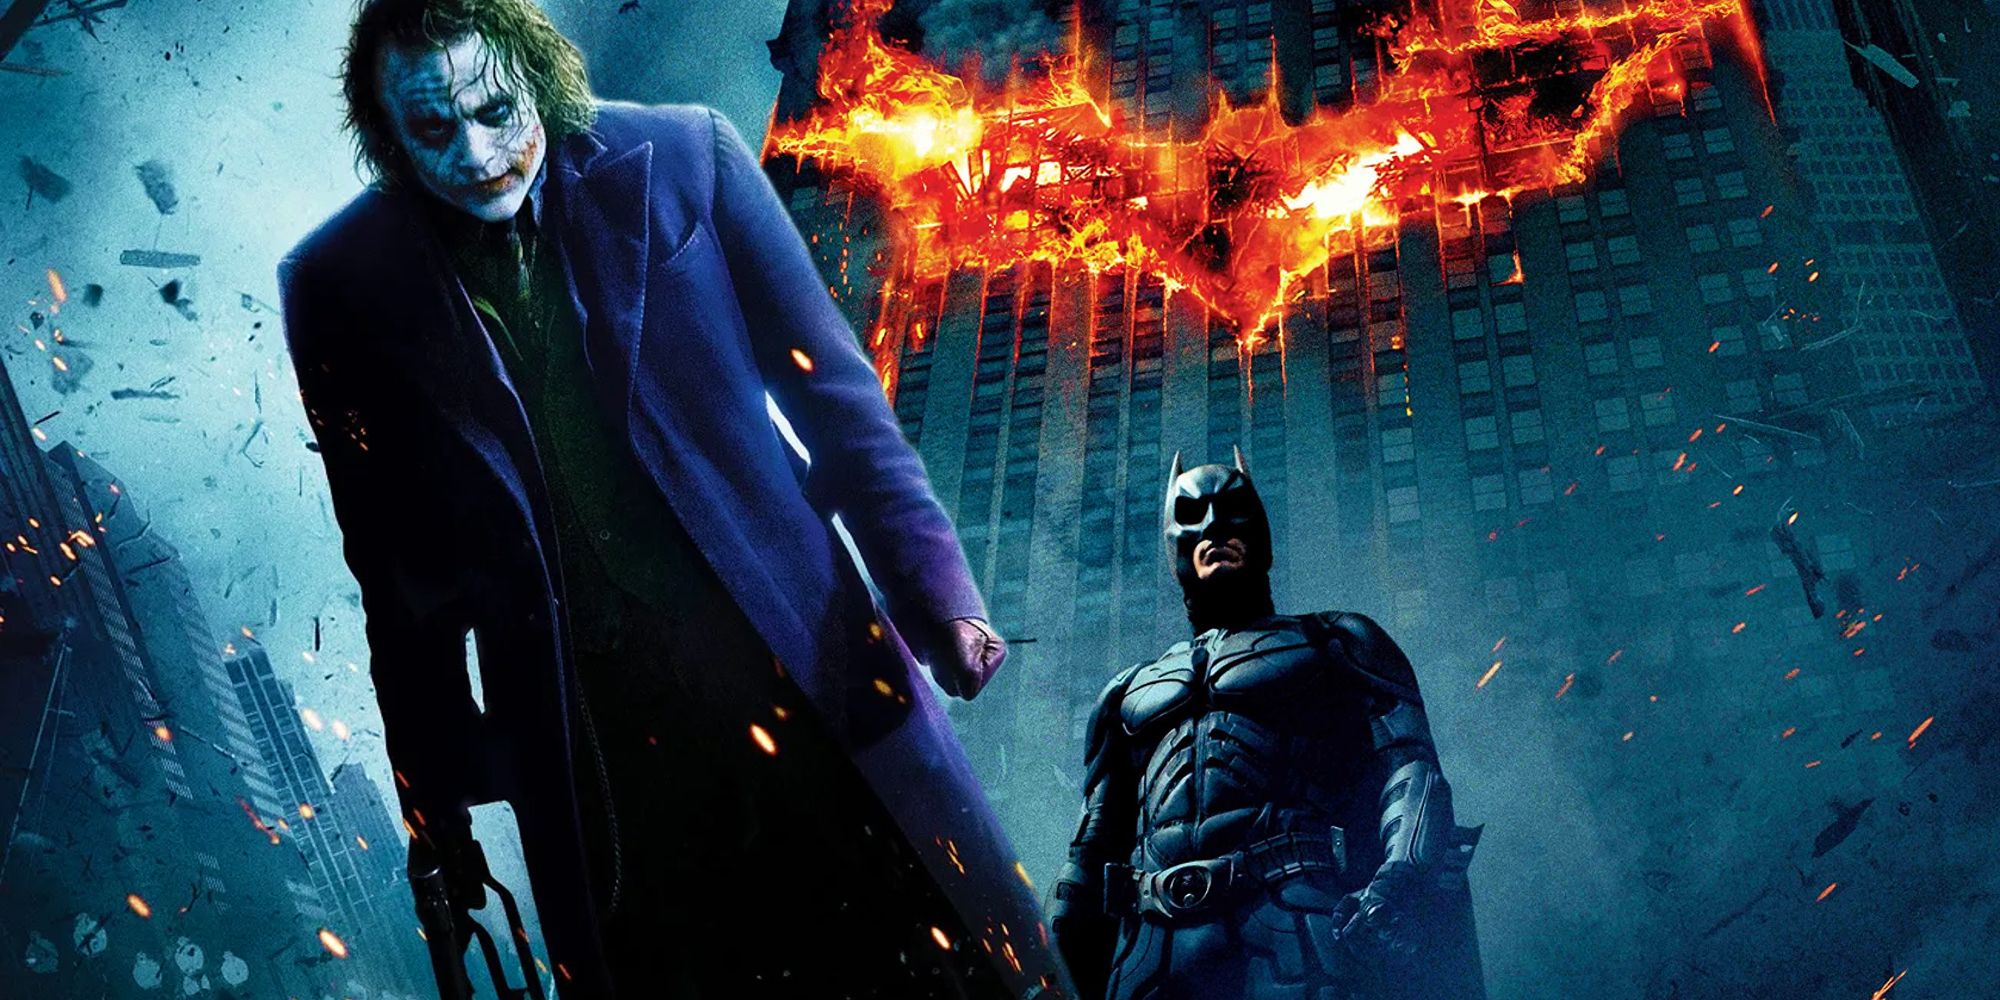 The Dark Knight Actor Explains How Christopher Nolan Got Action Right In His Batman Trilogy